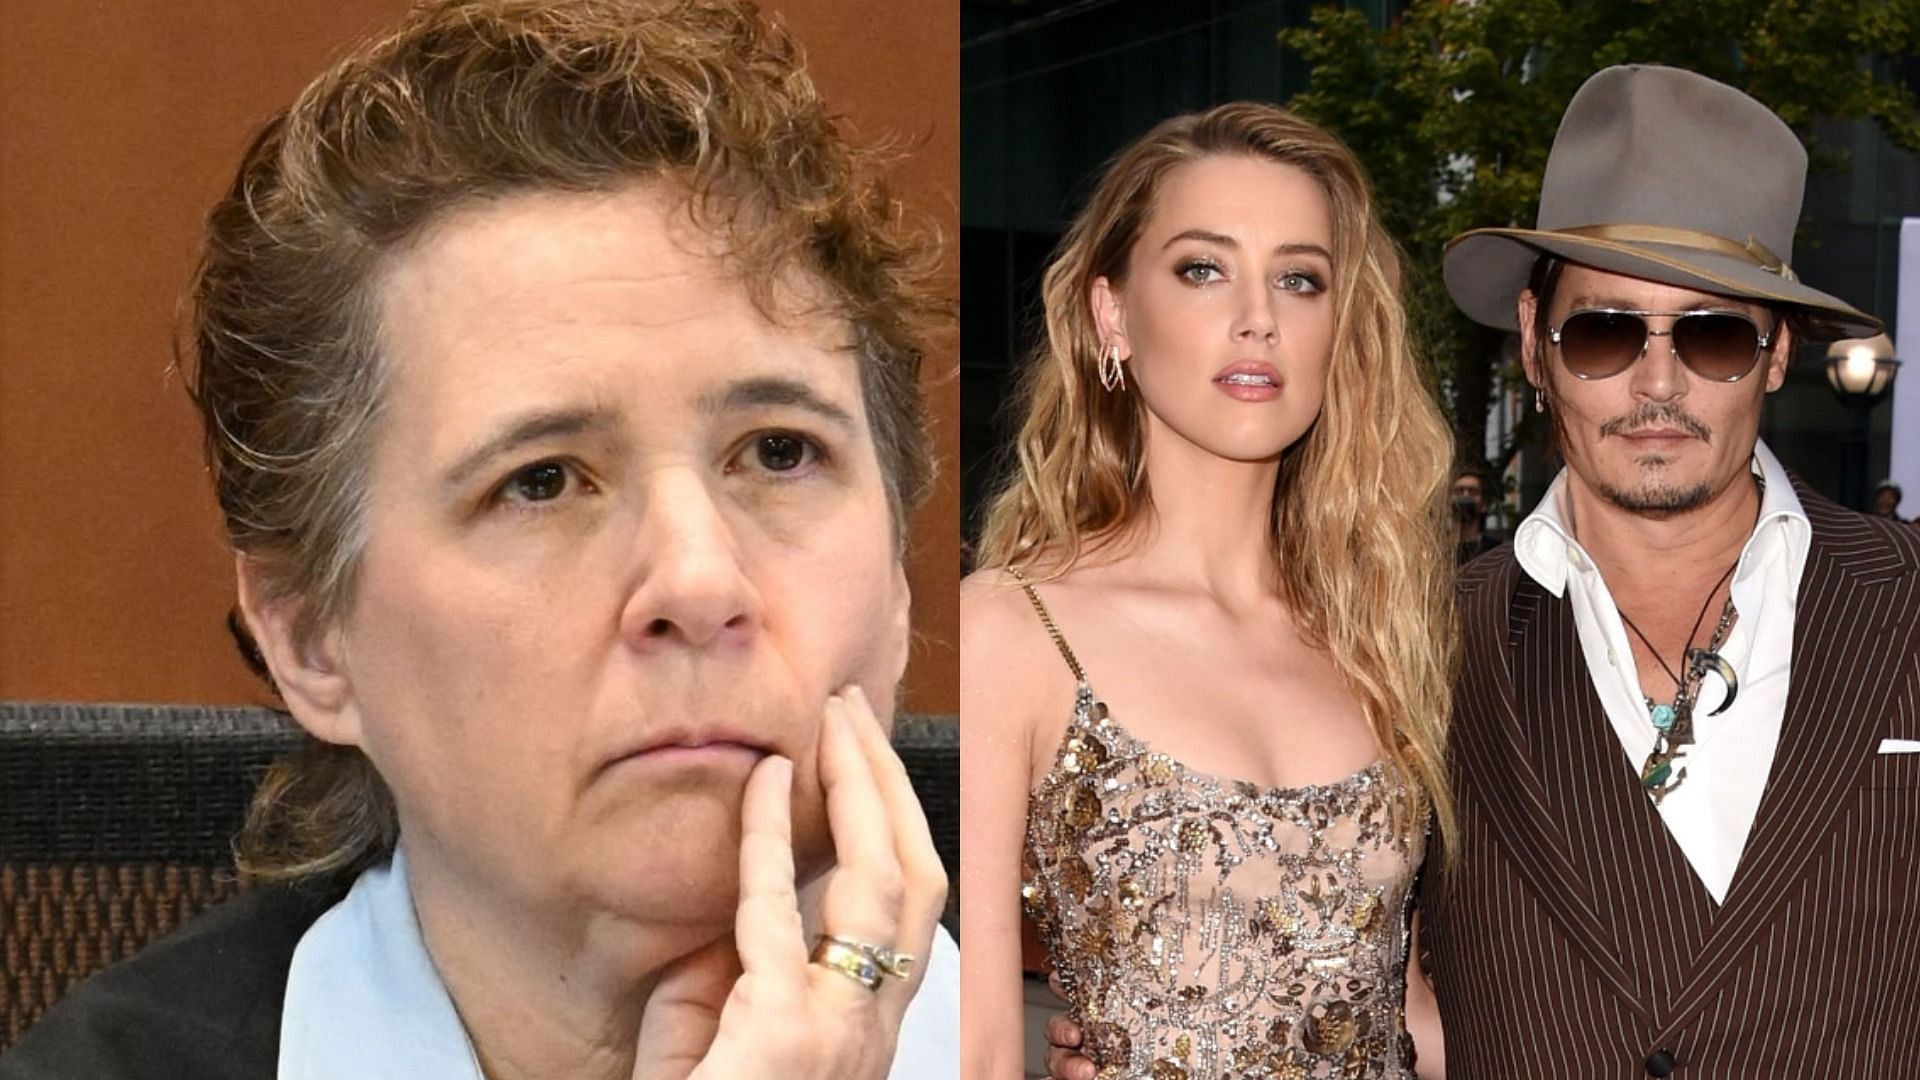 Judge Penny Azcarate refused to strike the &quot;inappropriate argument&quot; motion filed by Johnny Depp&#039;s team against Amber Heard (Image via Getty Images)